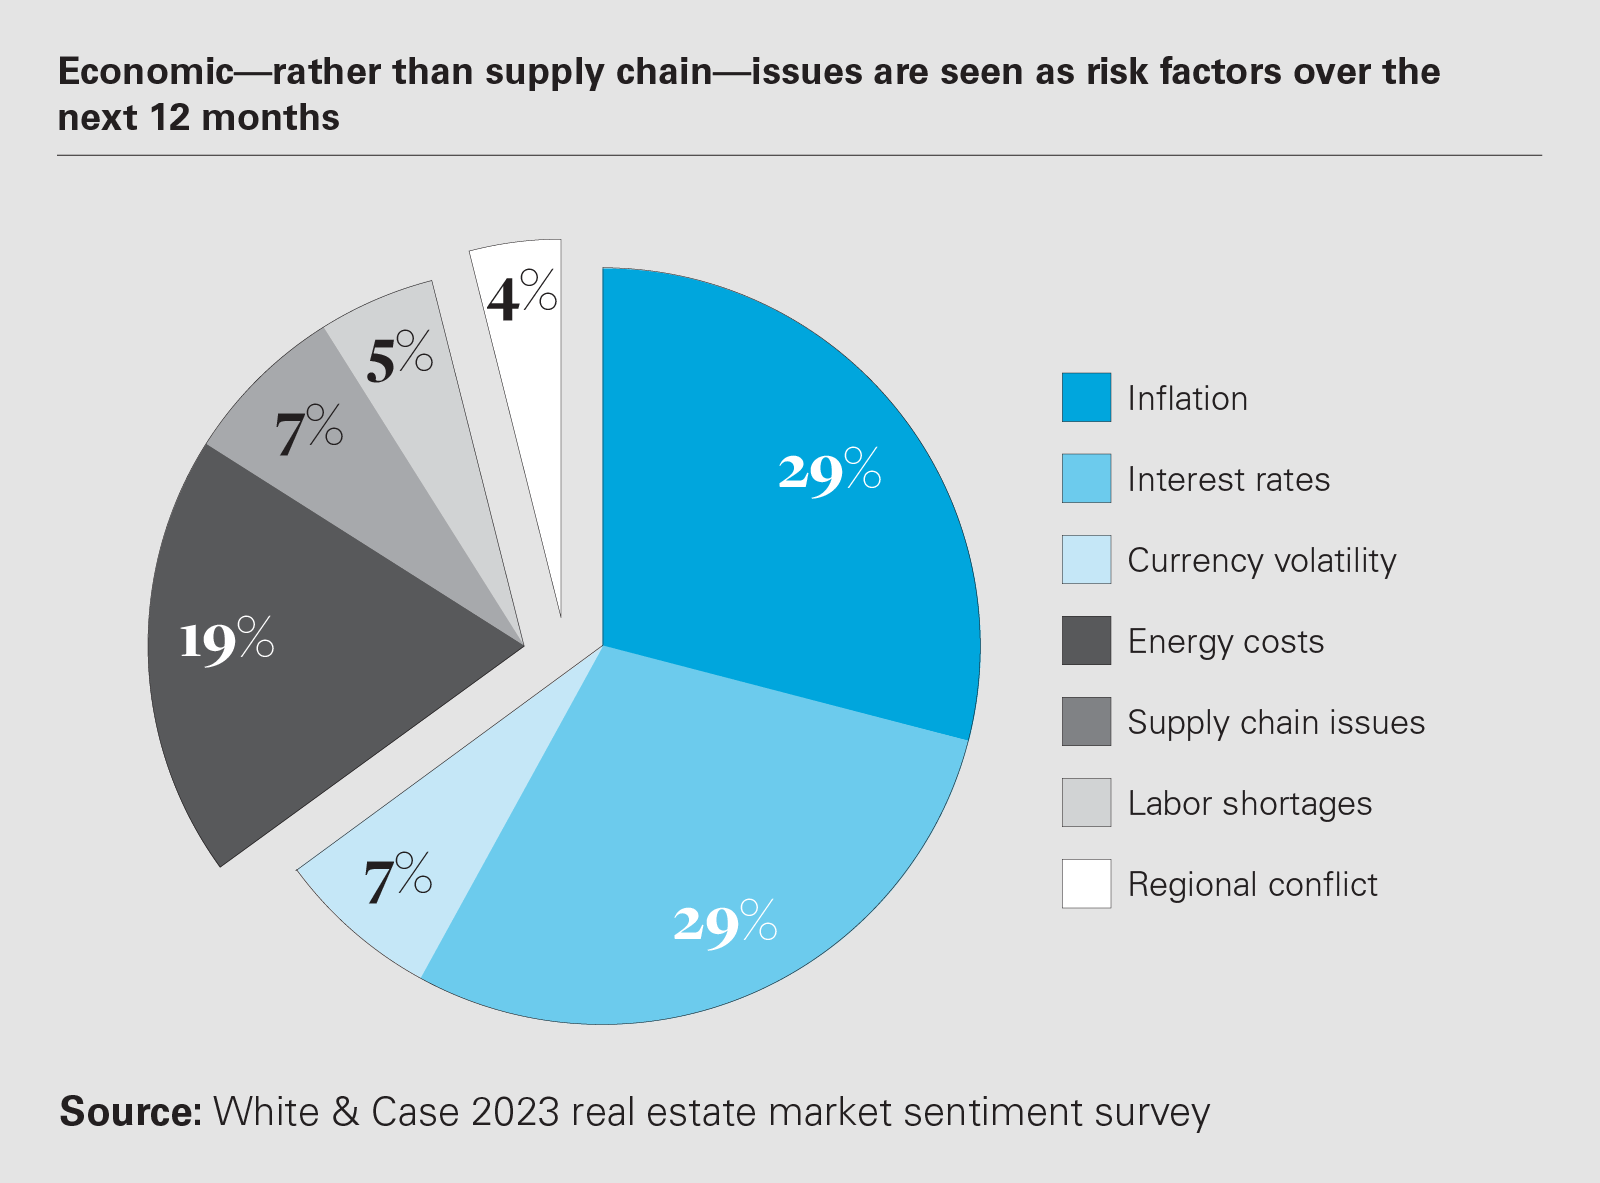 Economic—rather than supply chain—issues are seen as risk factors over the next 12 months